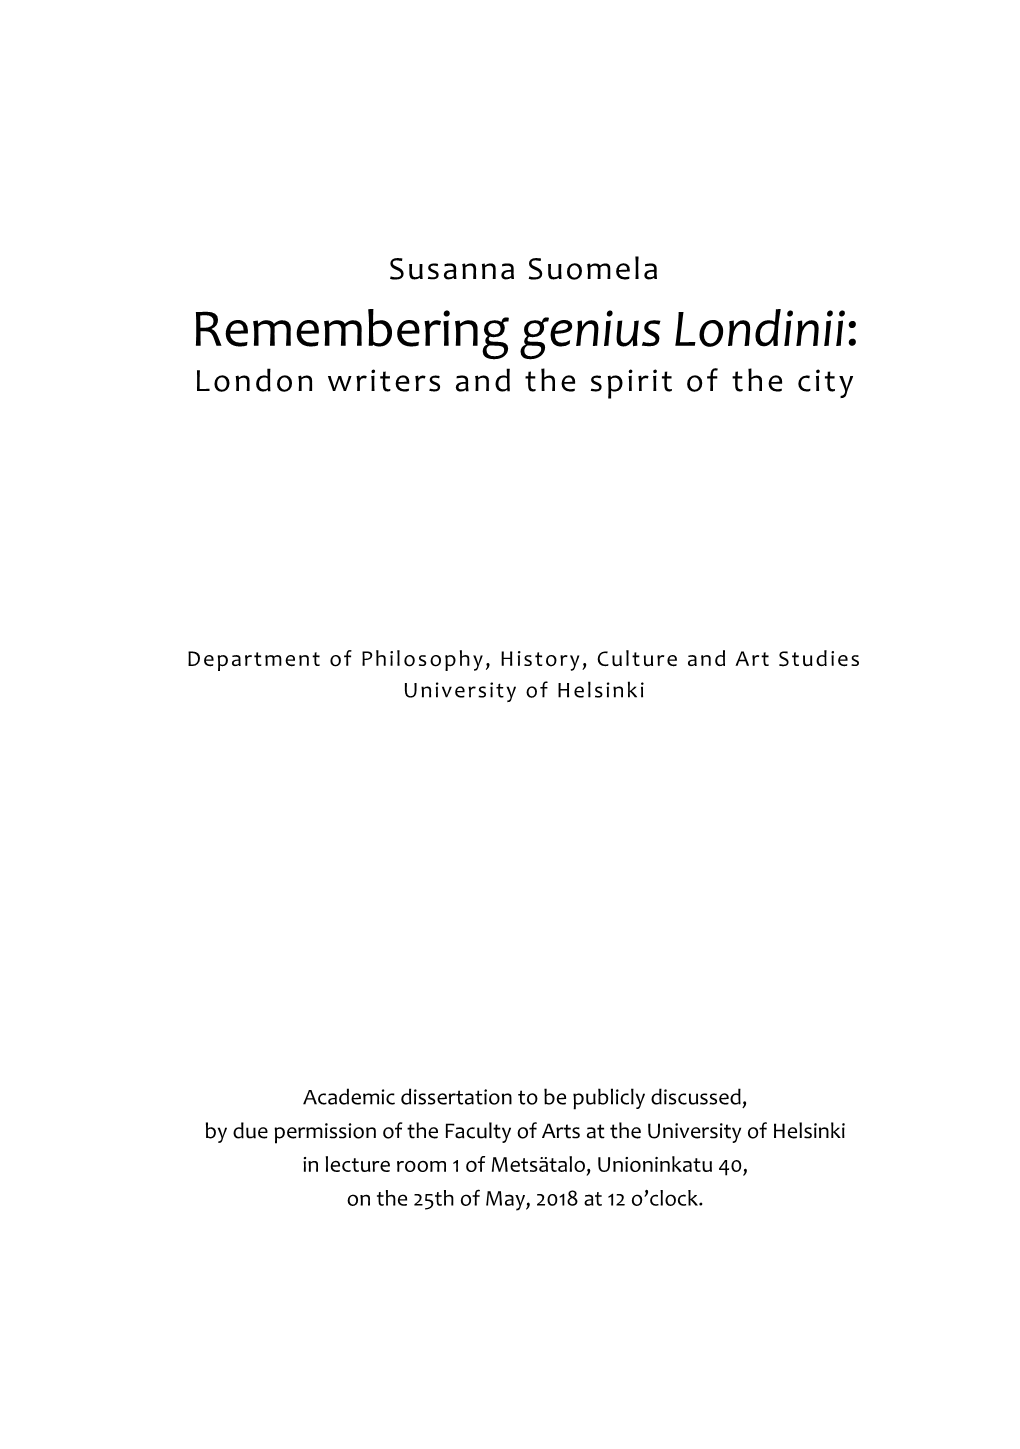 Remembering Genius Londinii: London Writers and the Spirit of the City